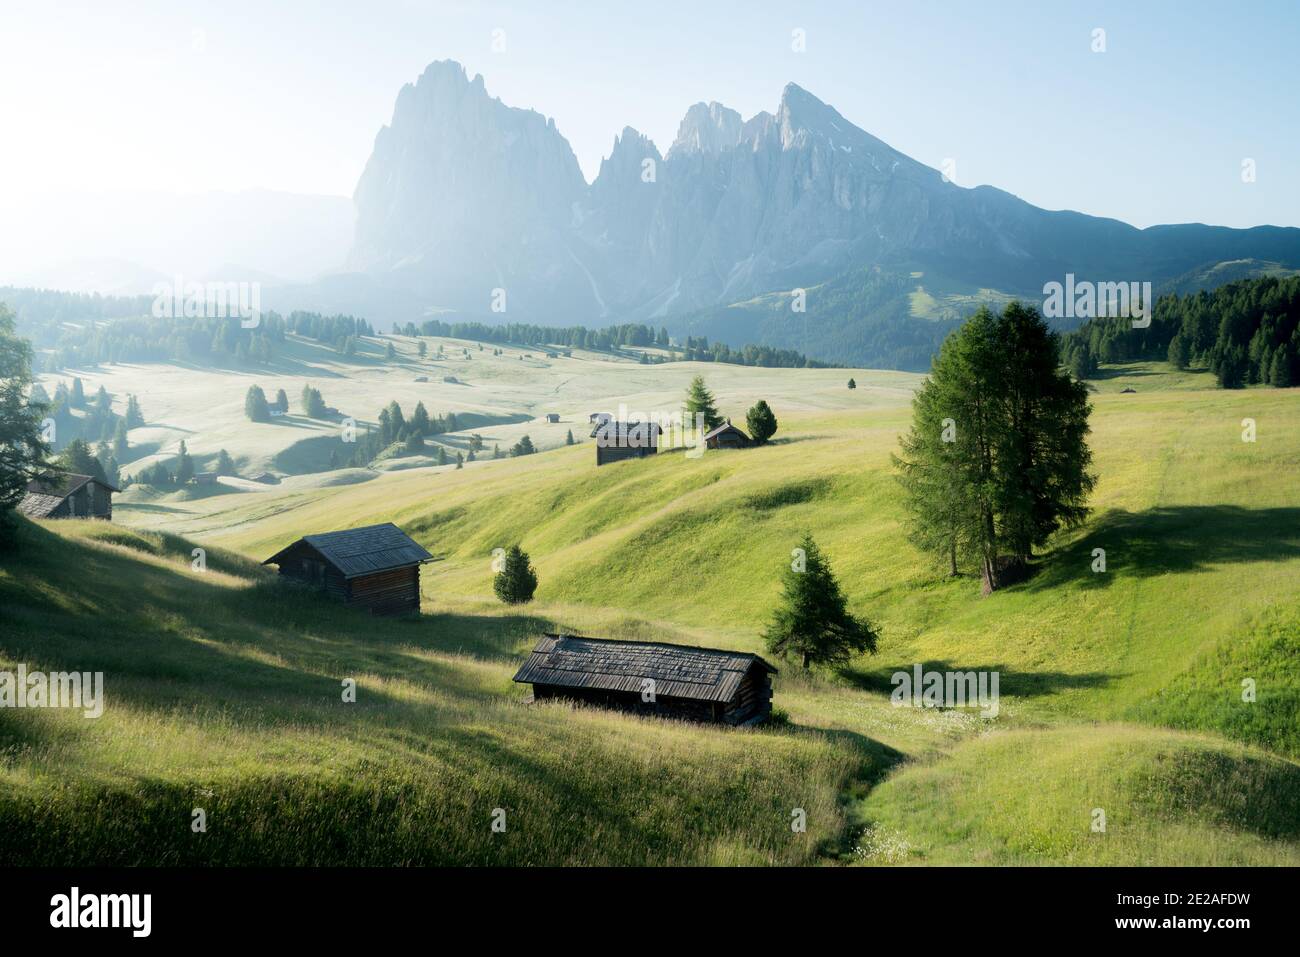 Idyllic mountain scenery in the Dolomites with traditional mountain cabins during a peaceful sunrise in spring, Alpe di Siusi, South Tyrol, Italy Stock Photo